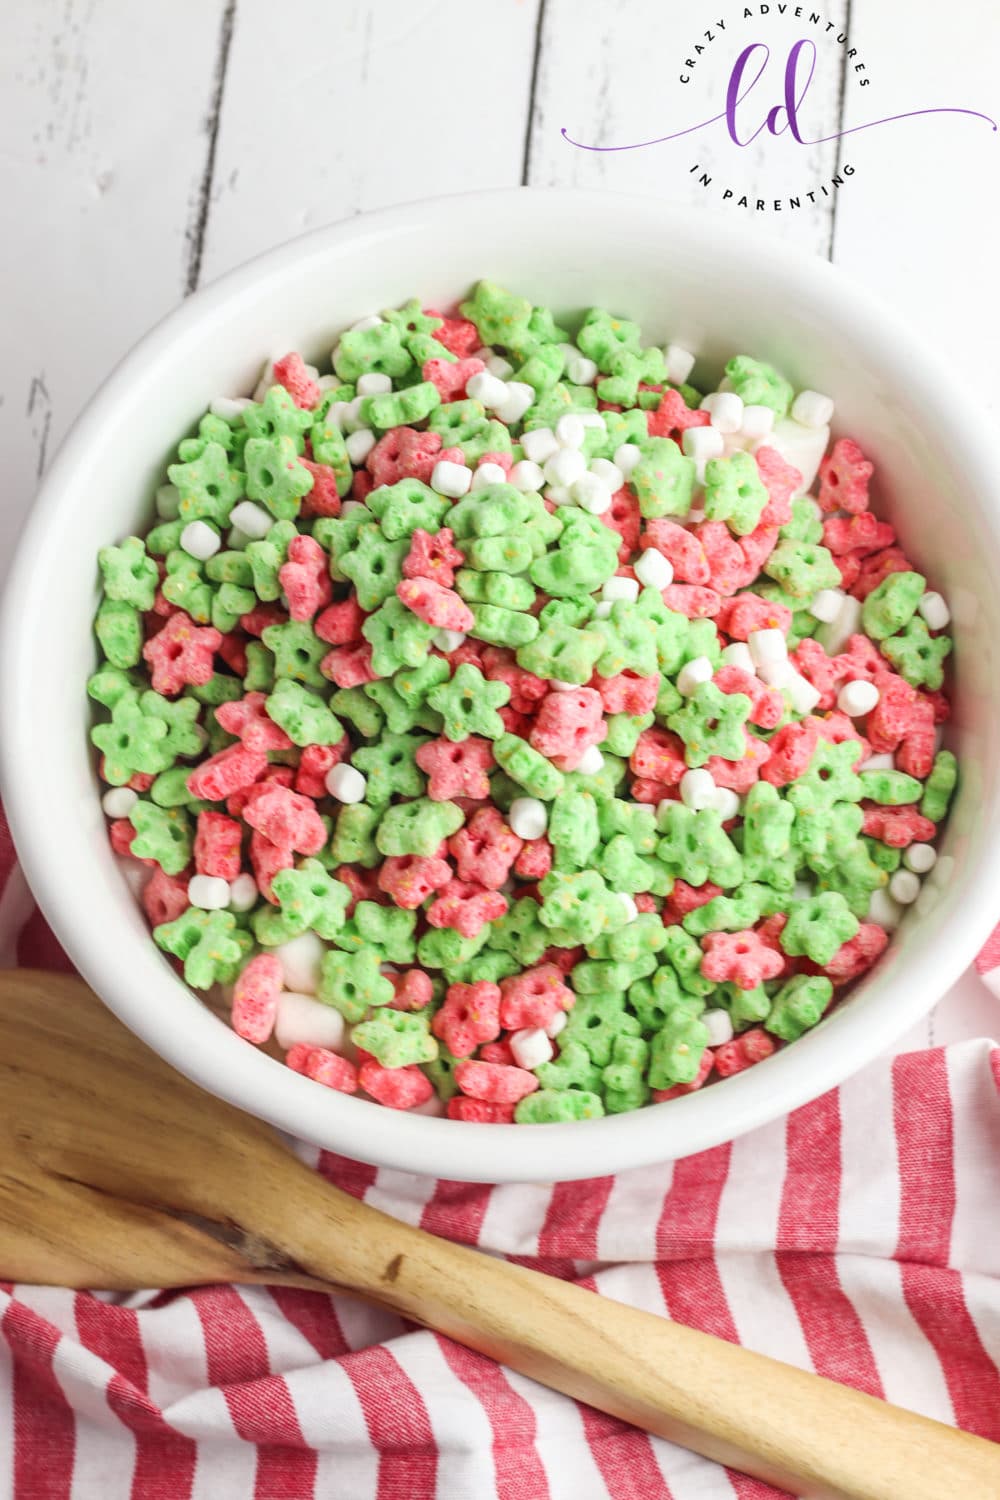 Add Cereal to Melted Marshmallow Mixture for Elf on the Shelf Cereal Treats